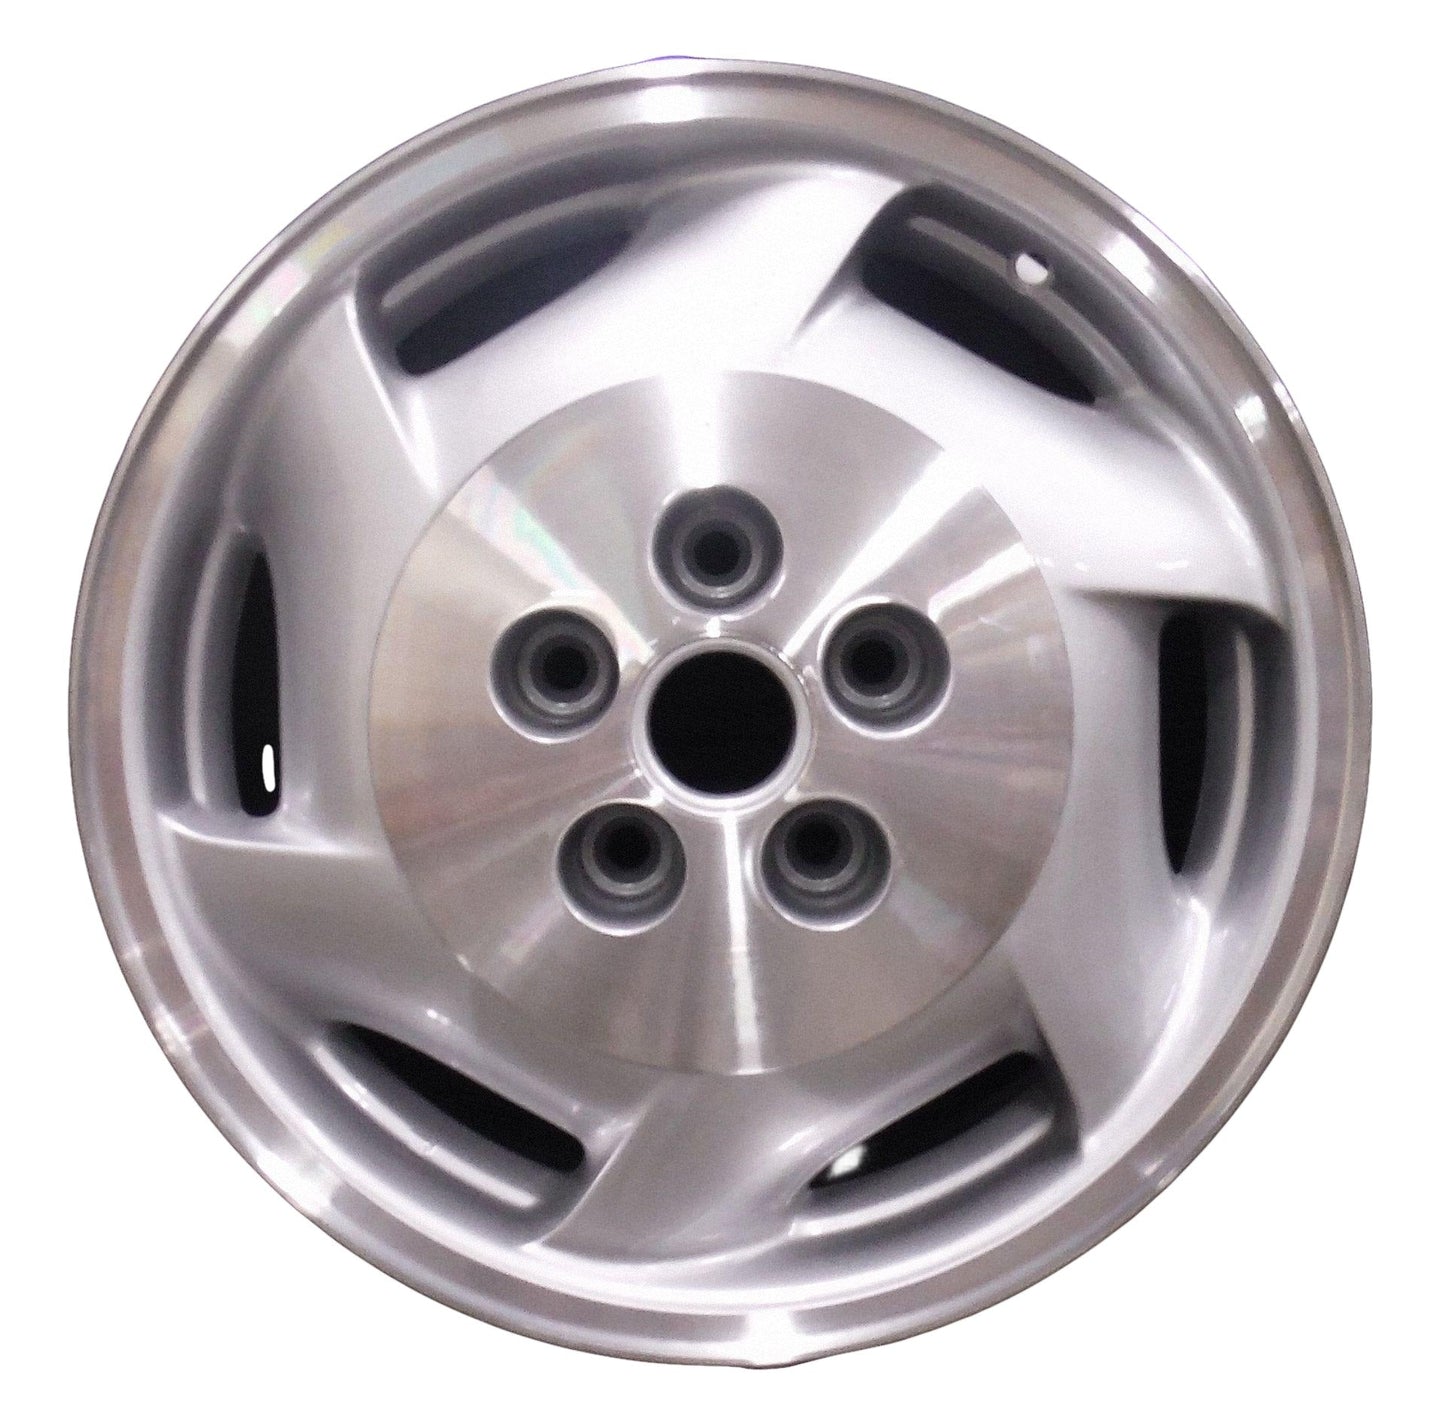 Chevrolet Monte Carlo  1995, 1996, 1997, 1998, 1999, 2000 Factory OEM Car Wheel Size 16x6.5 Alloy WAO.5046.PS03.MA